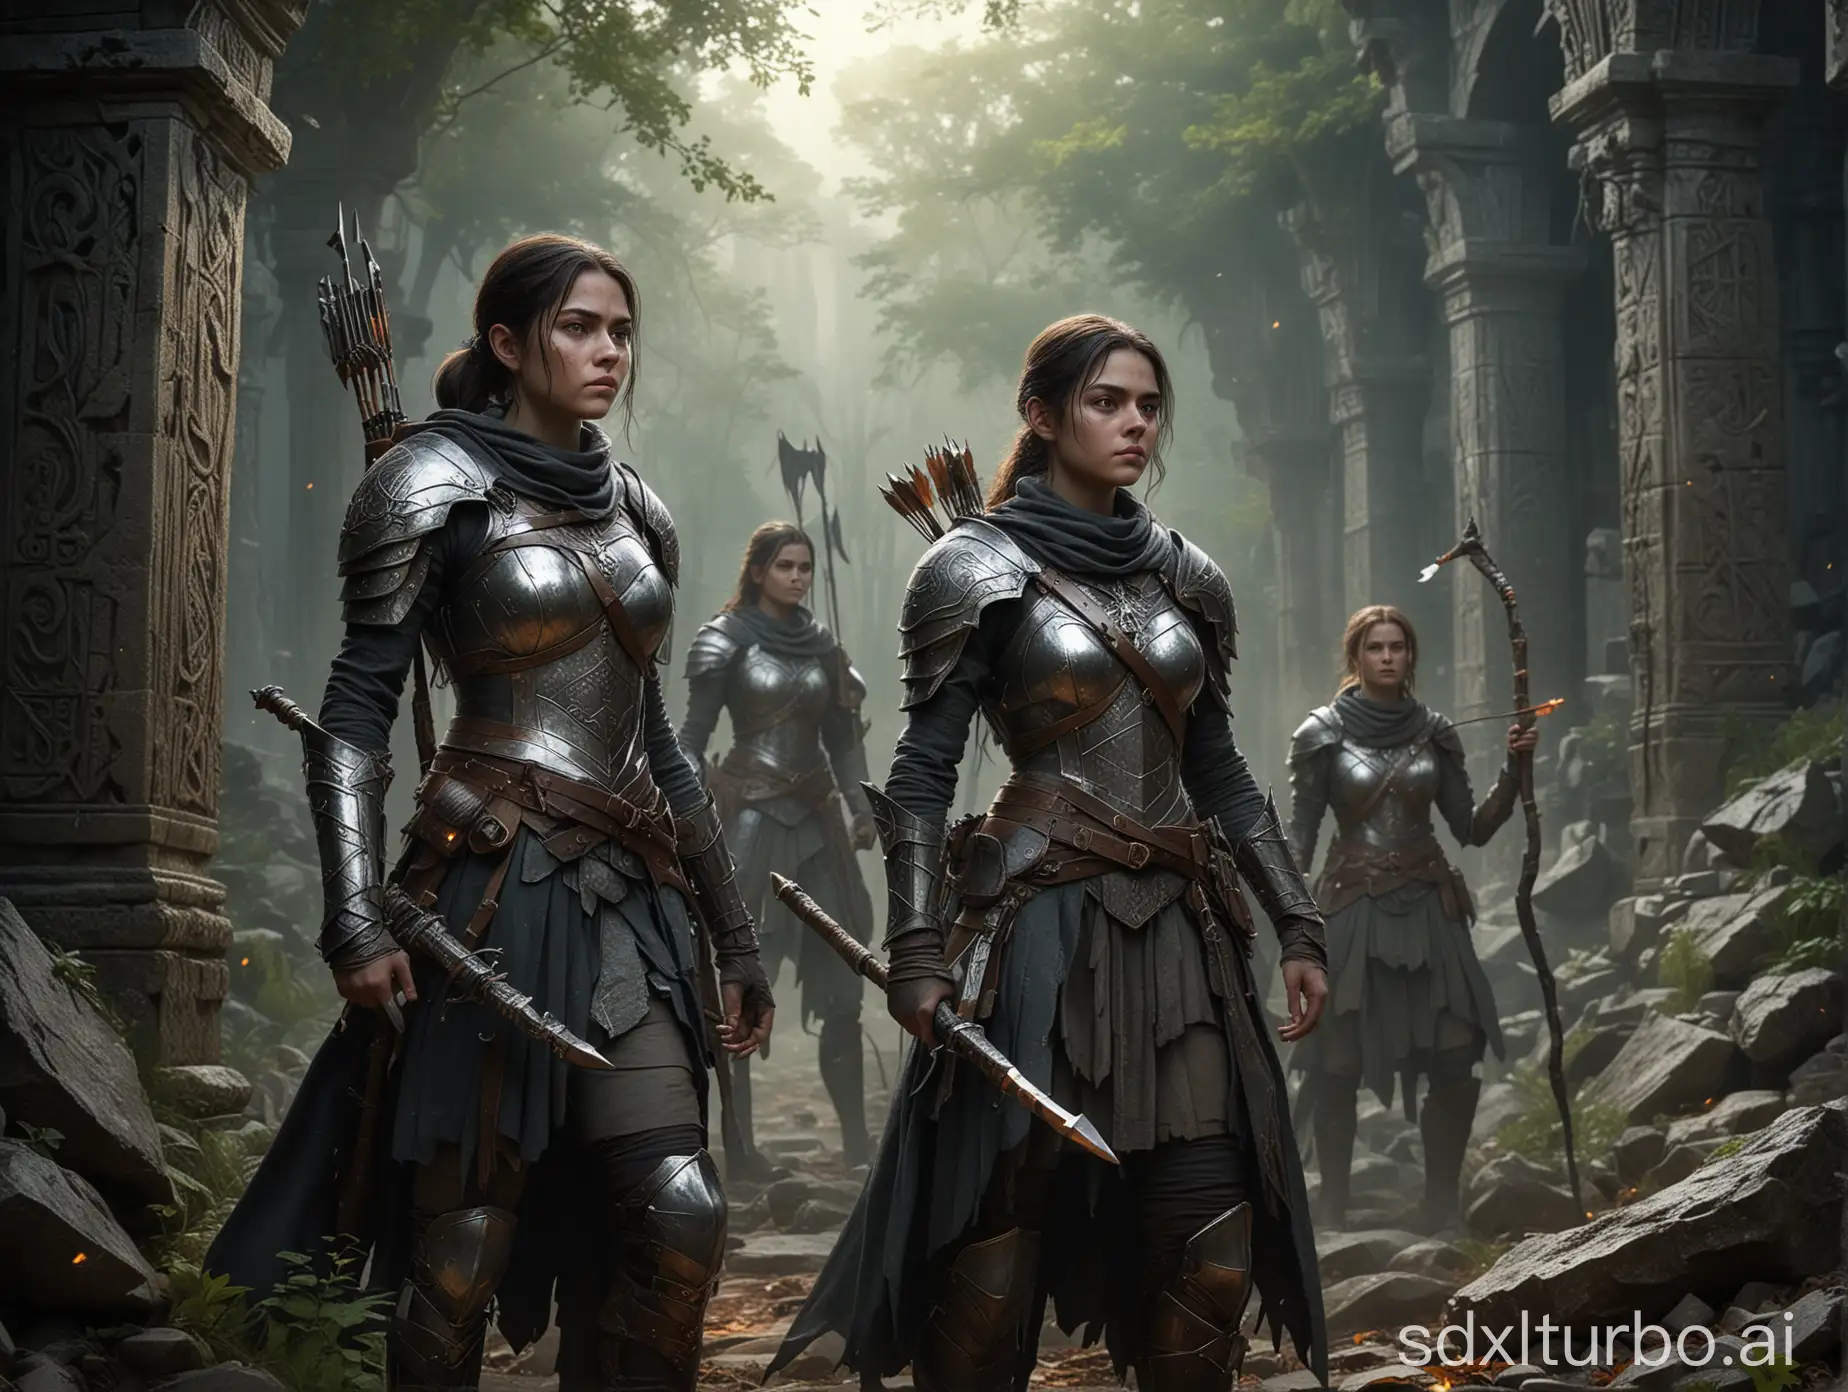 Courageous-Warriors-Exploring-Ancient-Temple-Ruins-Arya-and-Companions-Confronting-Dark-Forces-of-Selen